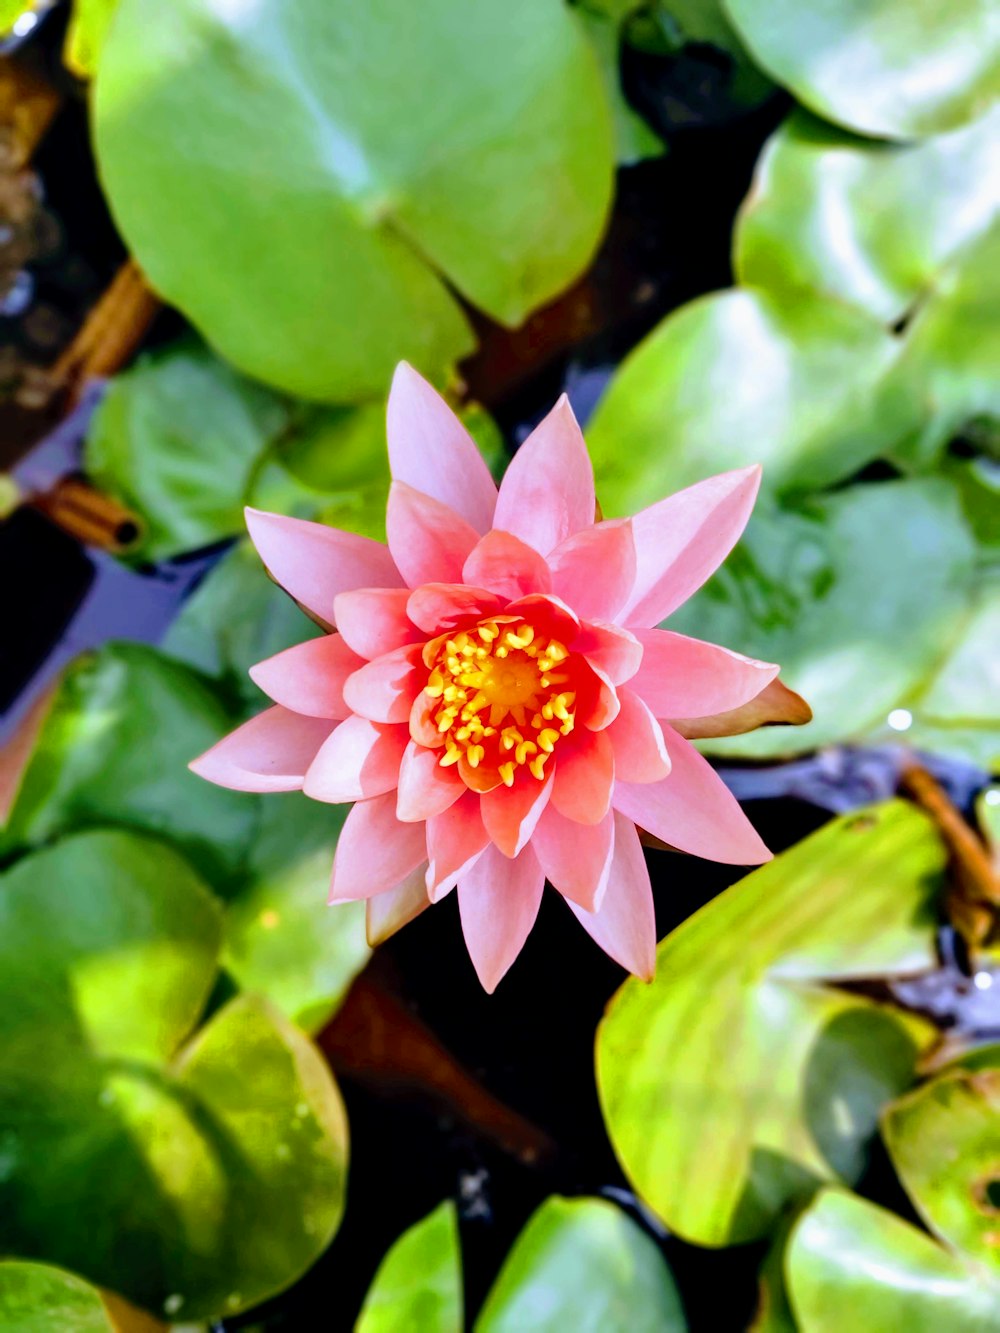 pink and yellow flower bloom during daytime